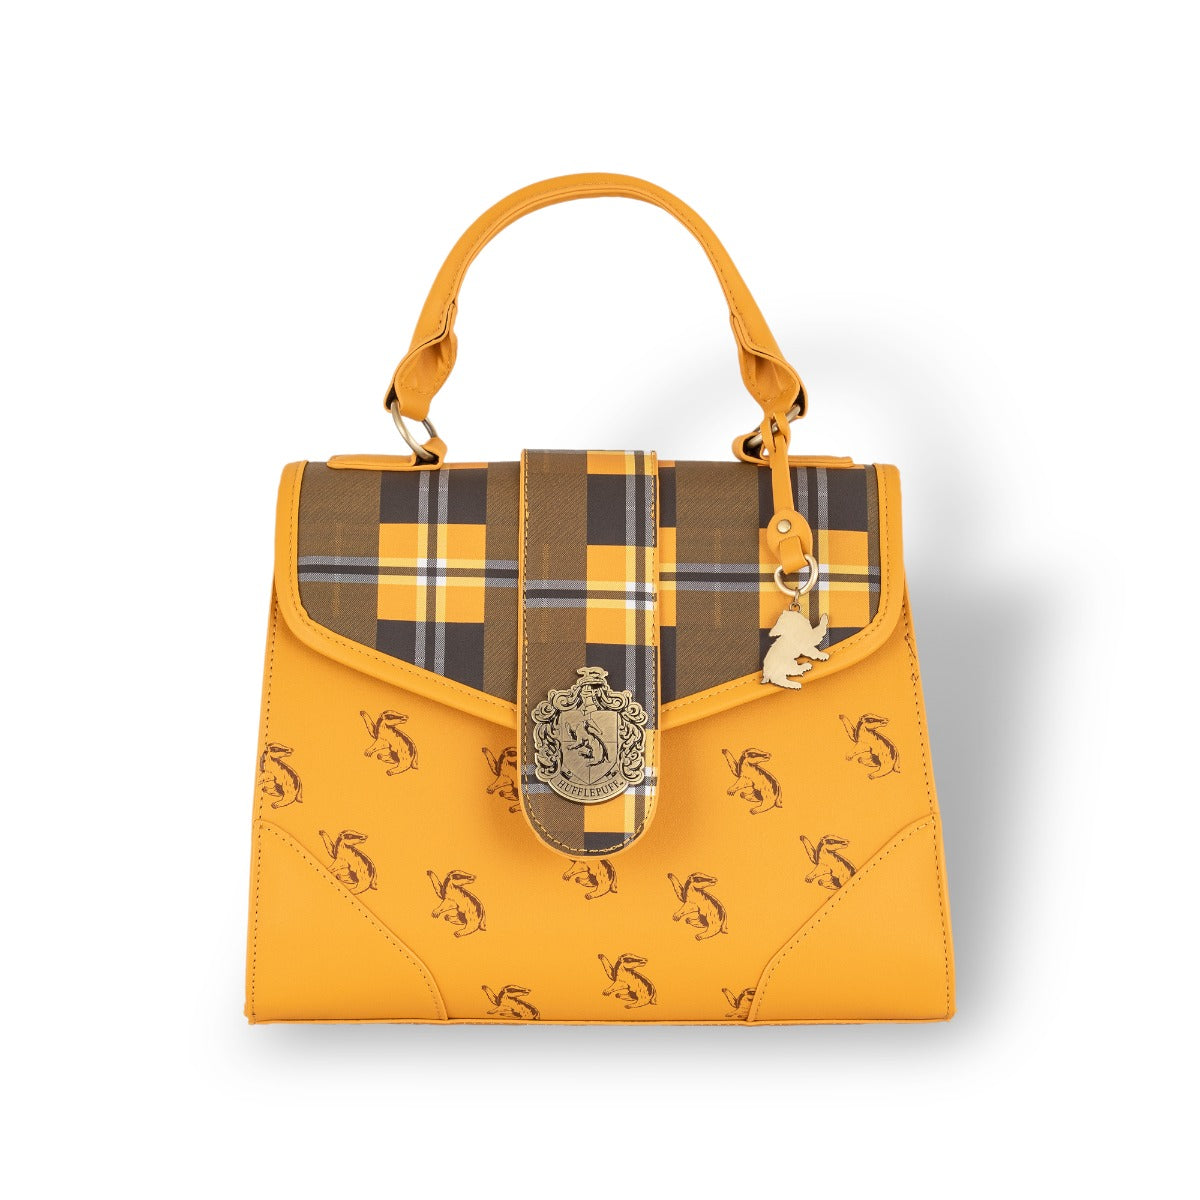 Hufflepuff Deluxe Tote Bag, Harry Potter